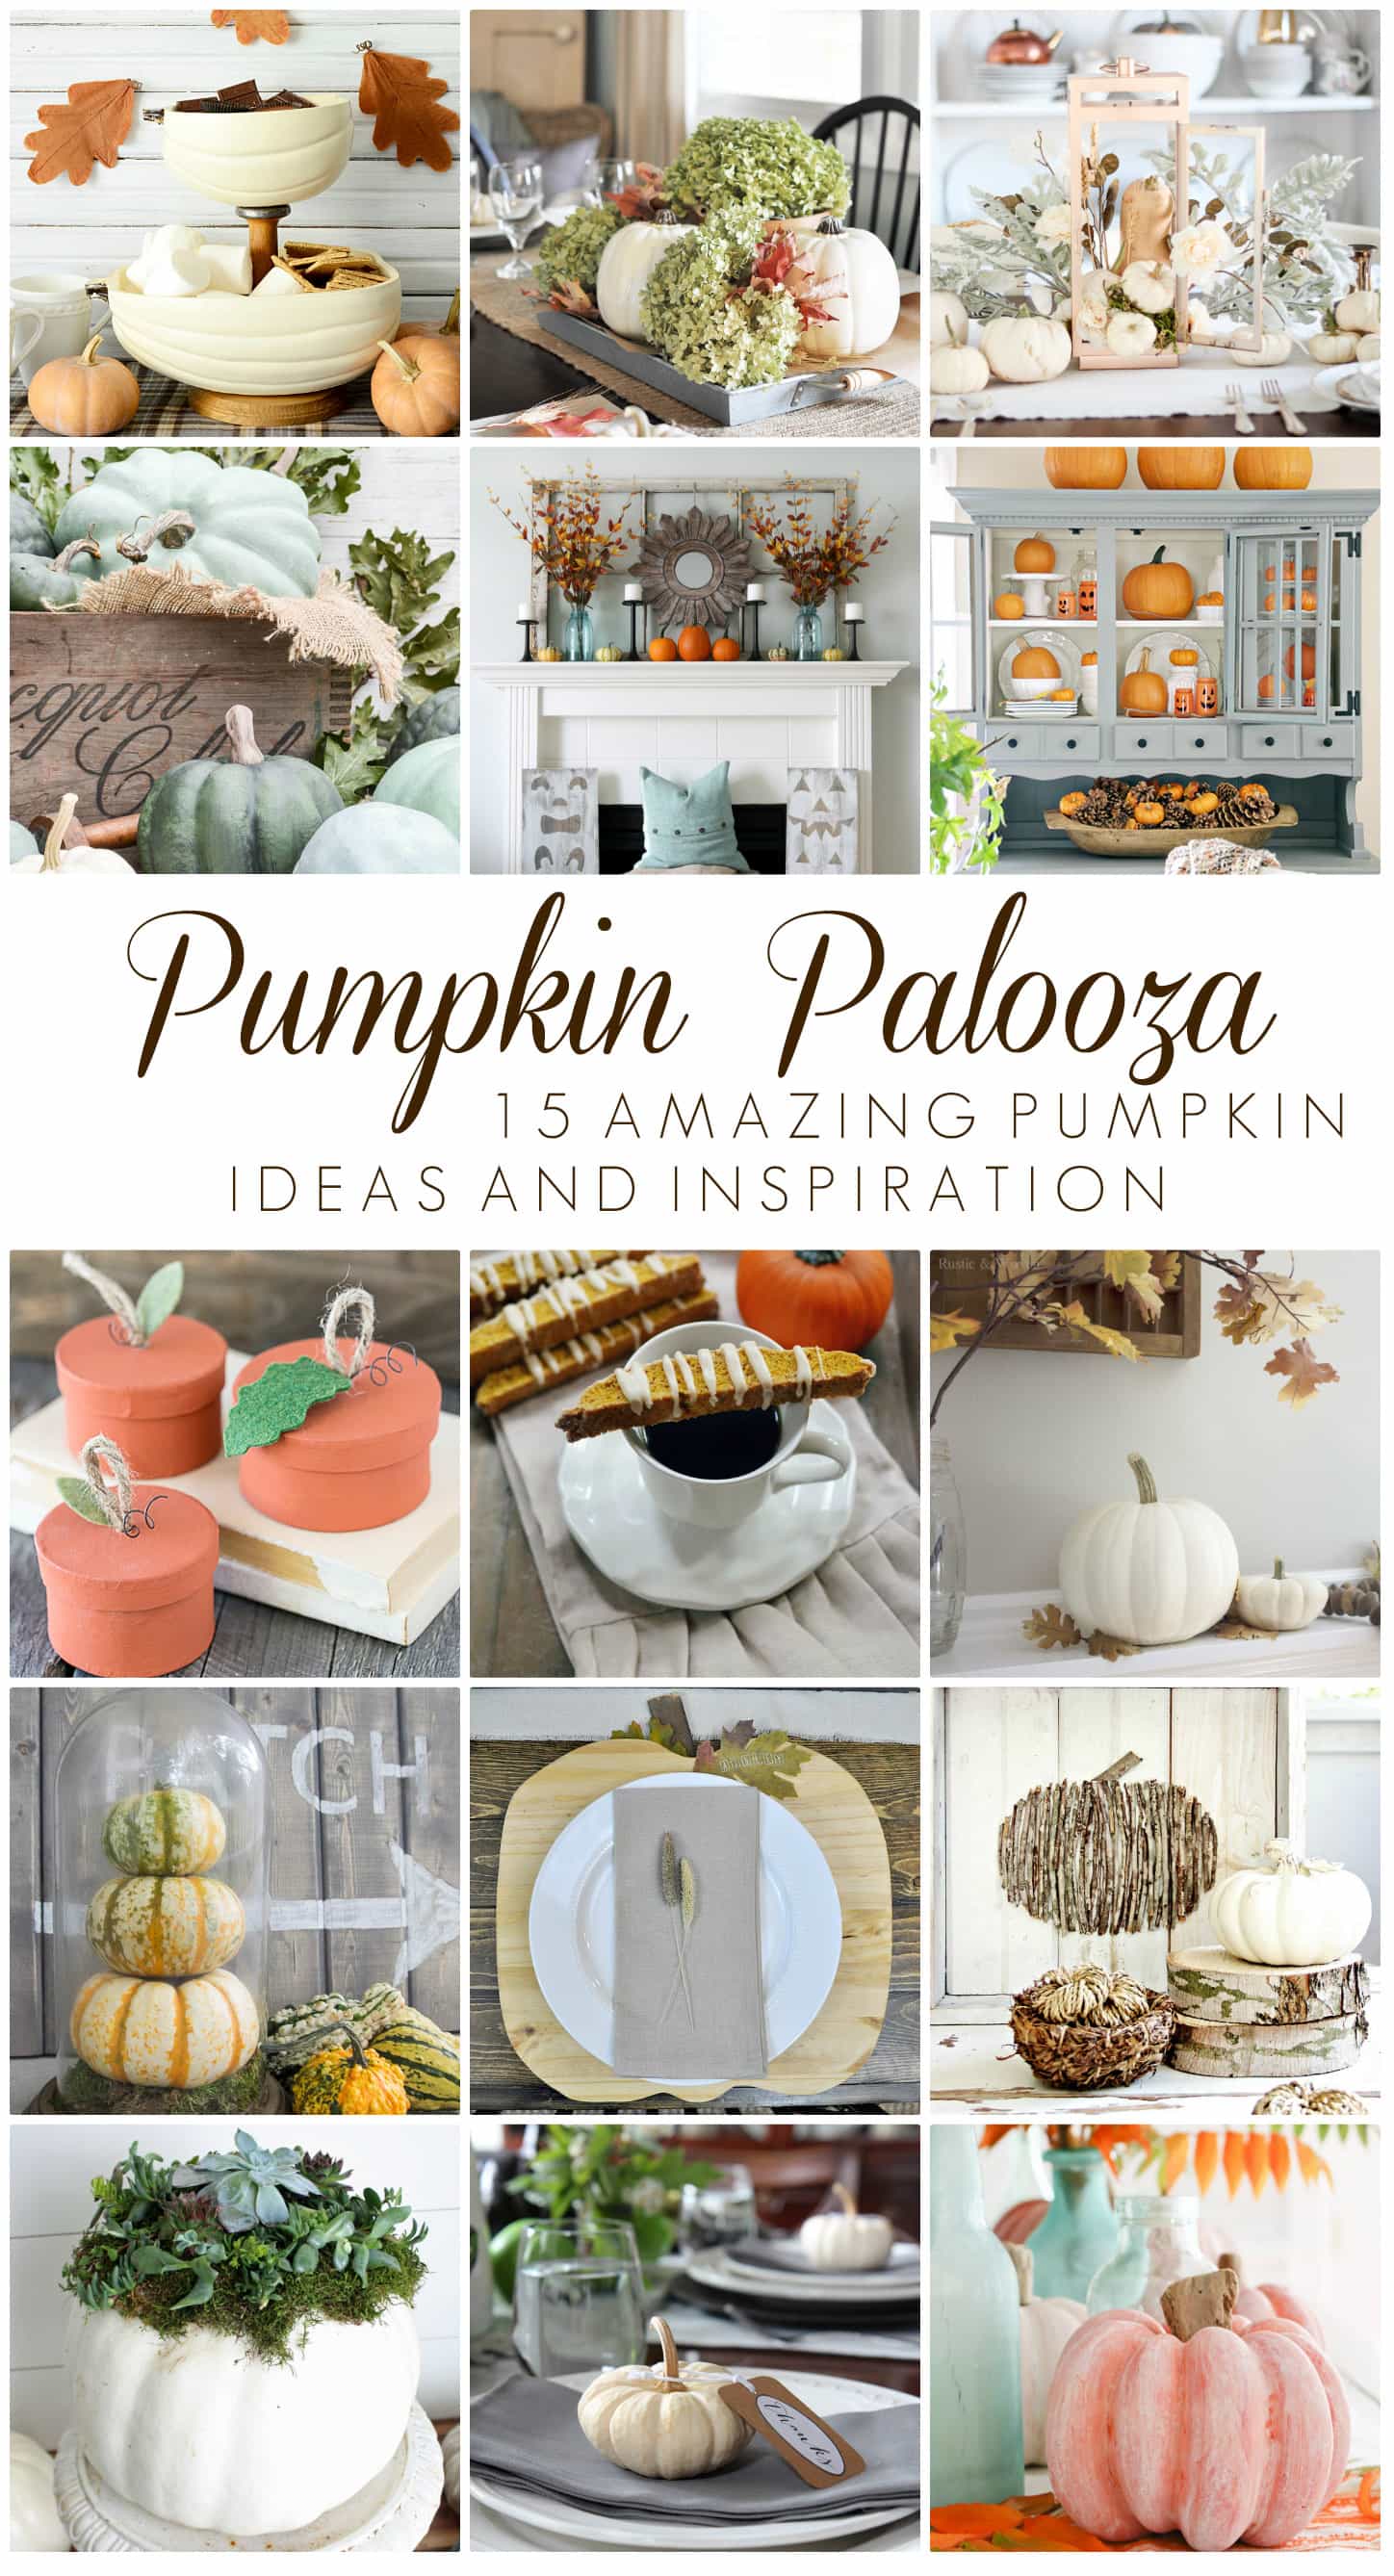 Pumpkin Palooza event - 15 bloggers teamed up with Country Living for all things pumpkin!